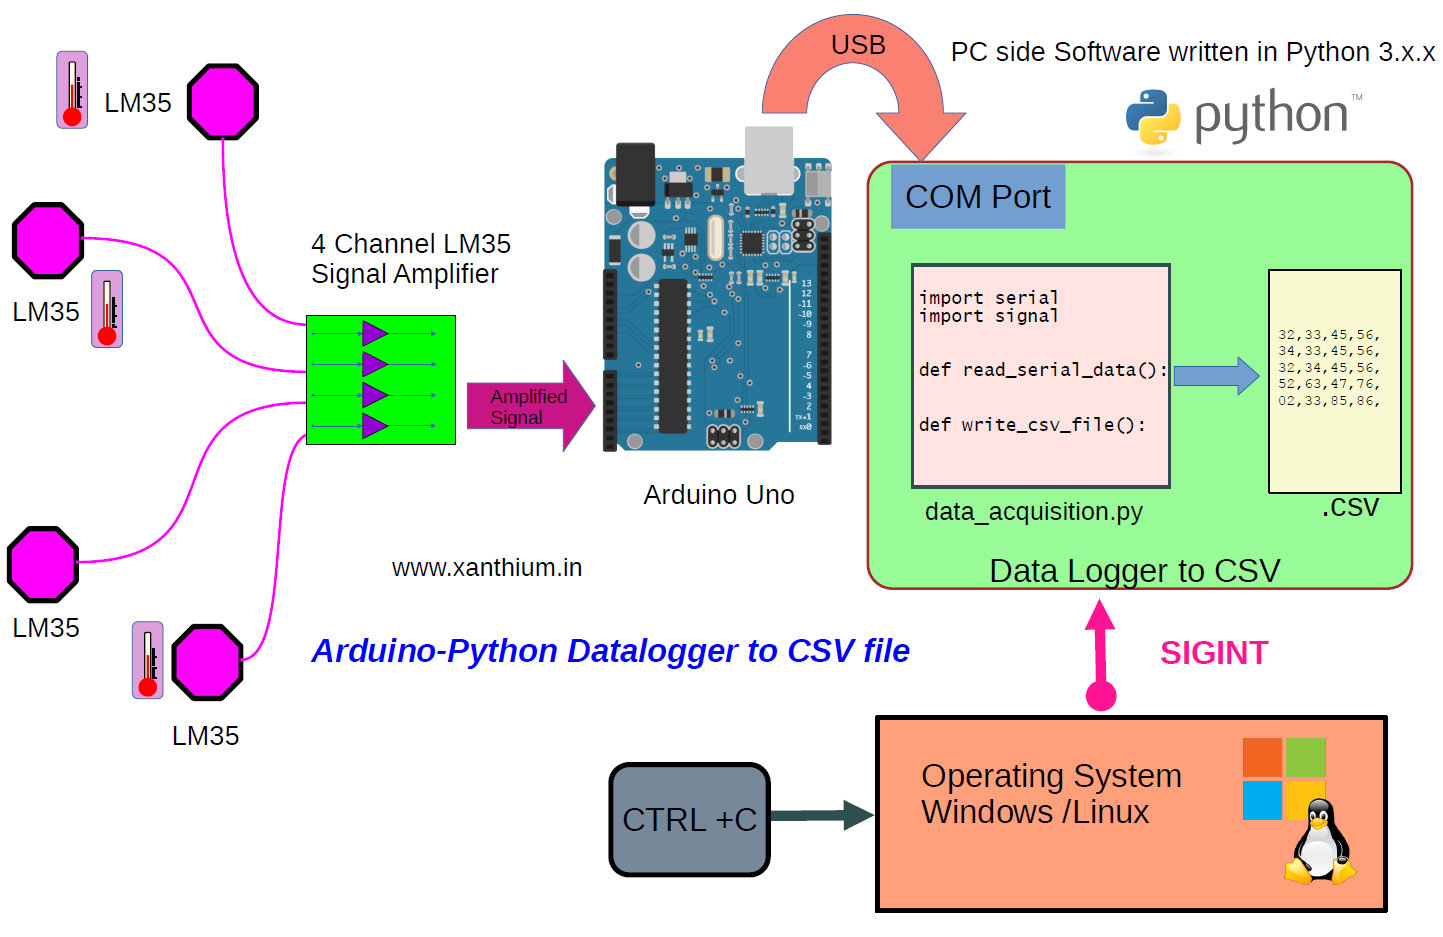 Build your own Data Acquisition System (.csv file) using Python and Arduino